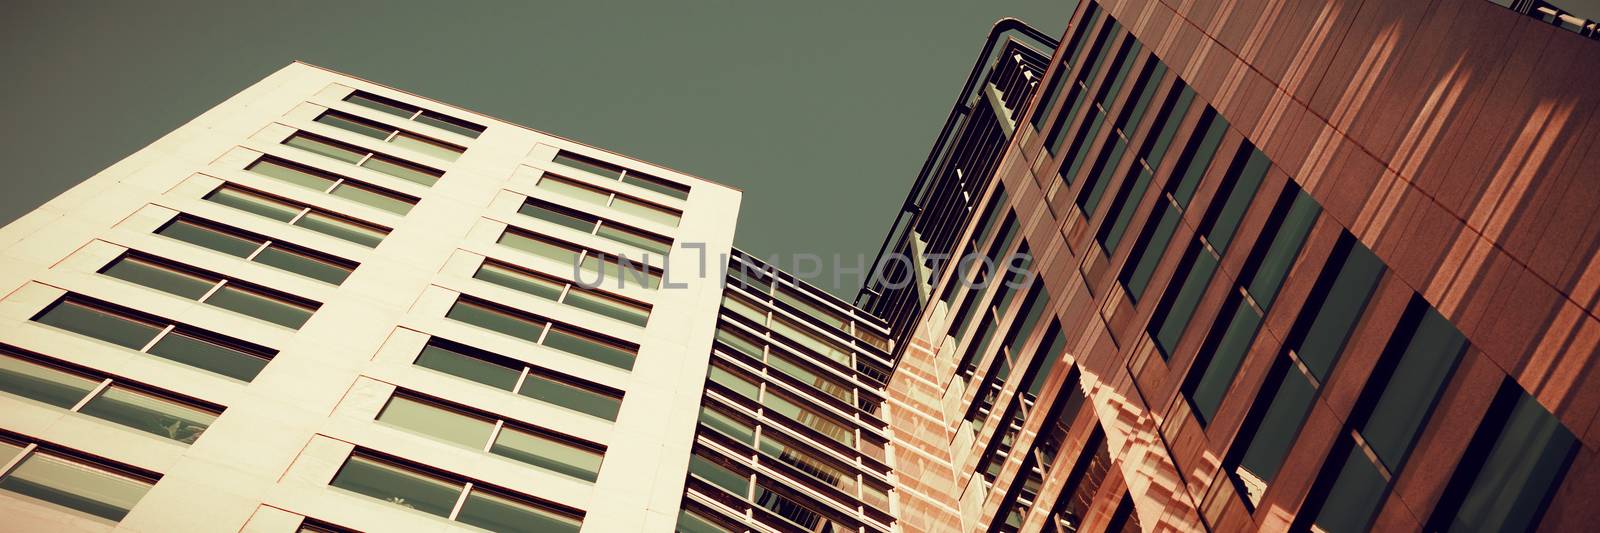 Low angle view of  office building by Wavebreakmedia